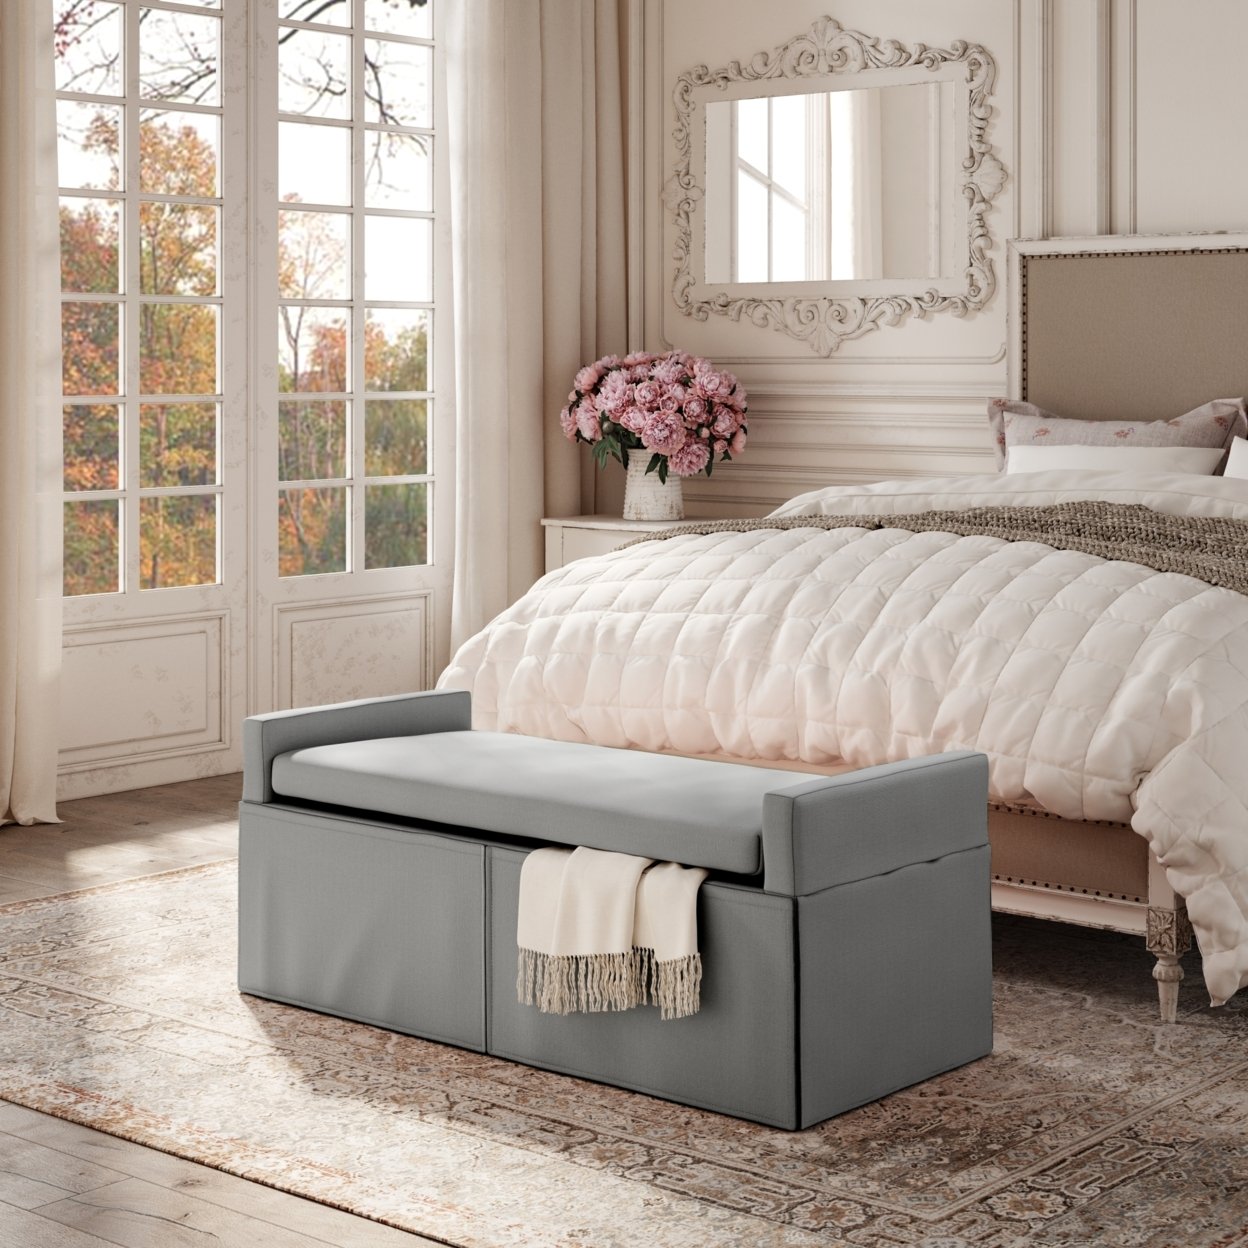 Xitlali Bench-Upholstered-Square Arms-Hinged Lid - Light Grey